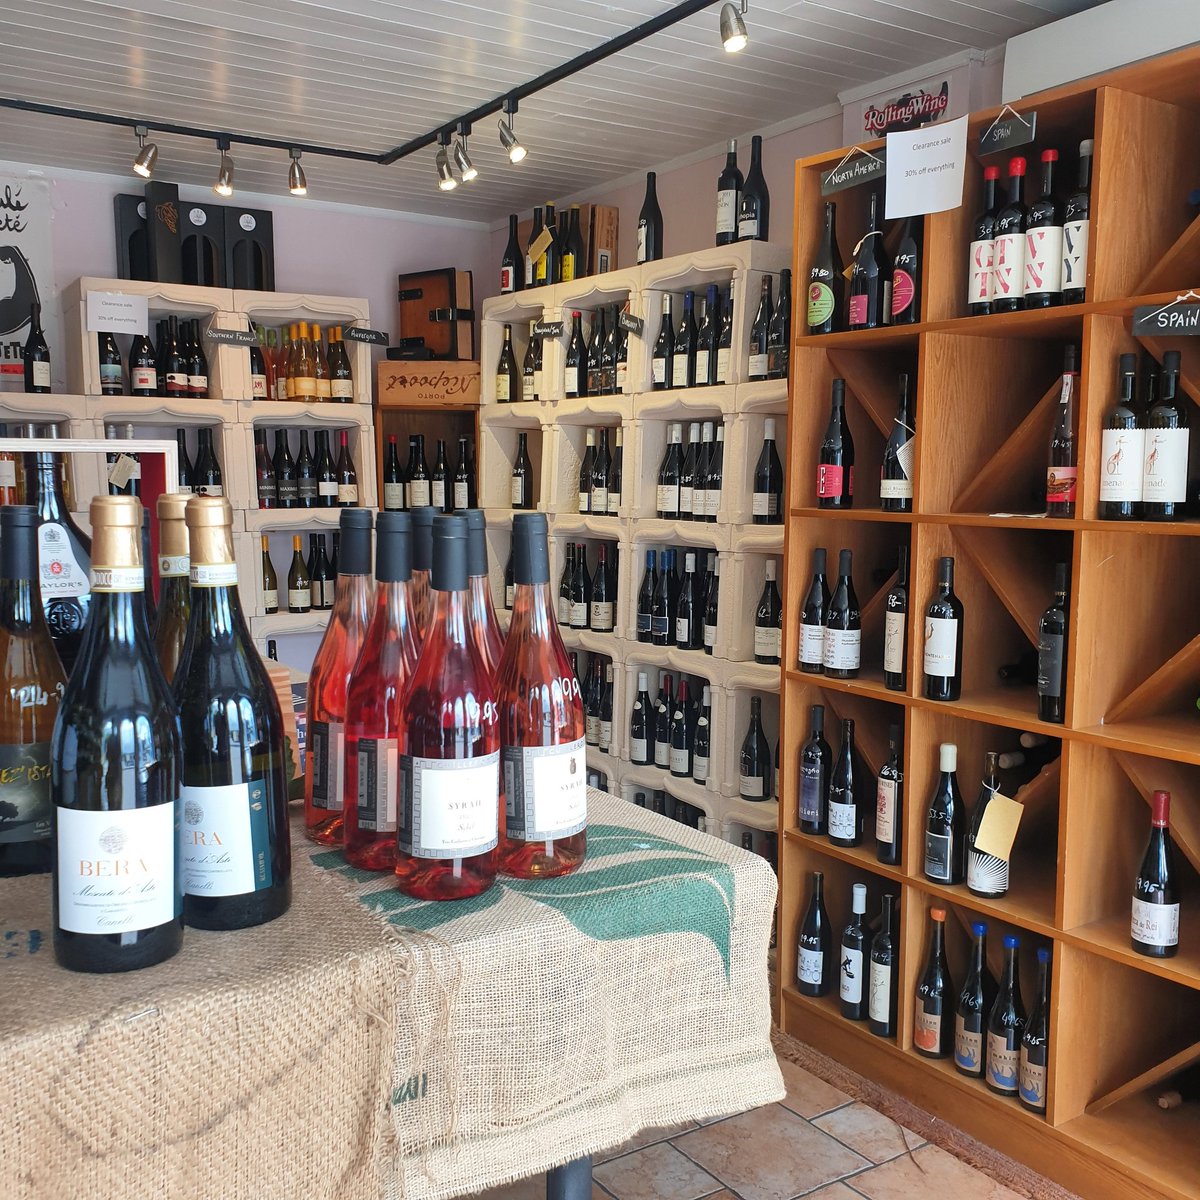 Last 3 days of our clearance sale on the Market Yard. Before we move our retail operation to online only. 11 to 3.30pm this Thursday, Friday and Saturday. (Wholesale to trade customers continues as usual) #bagabargain #winesale @lecaveau2